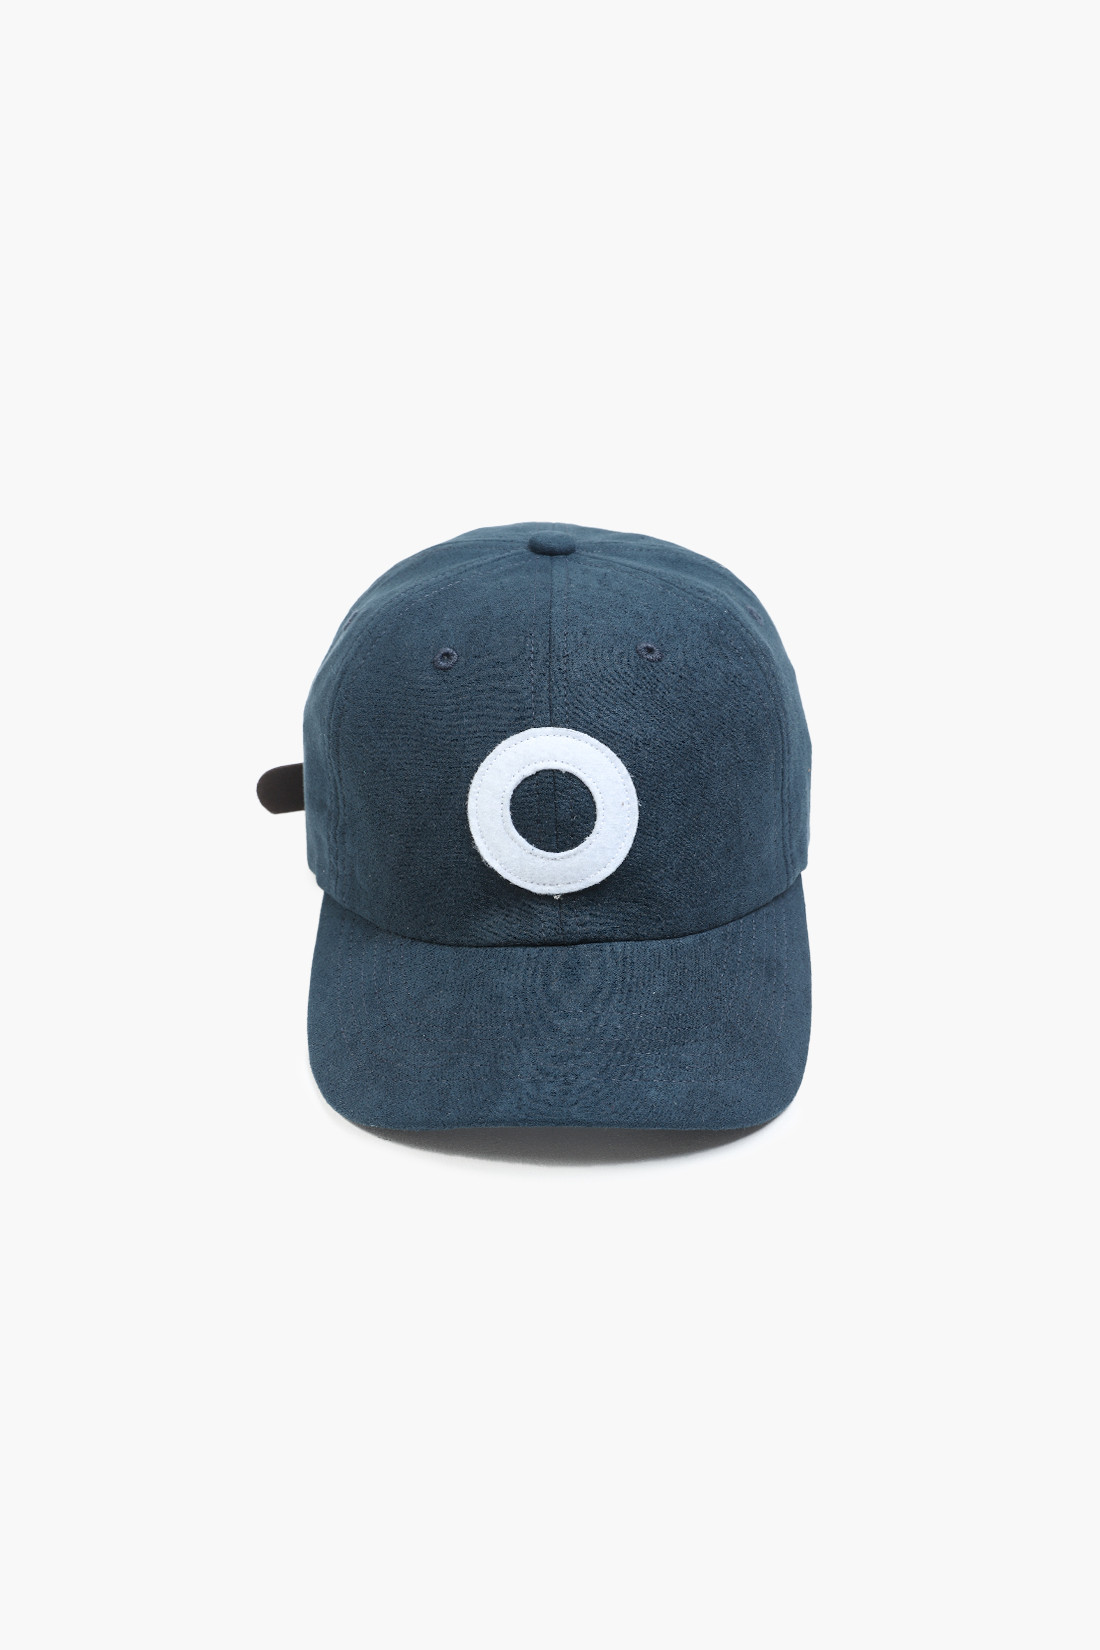 Suede o sixpanel hat Navy